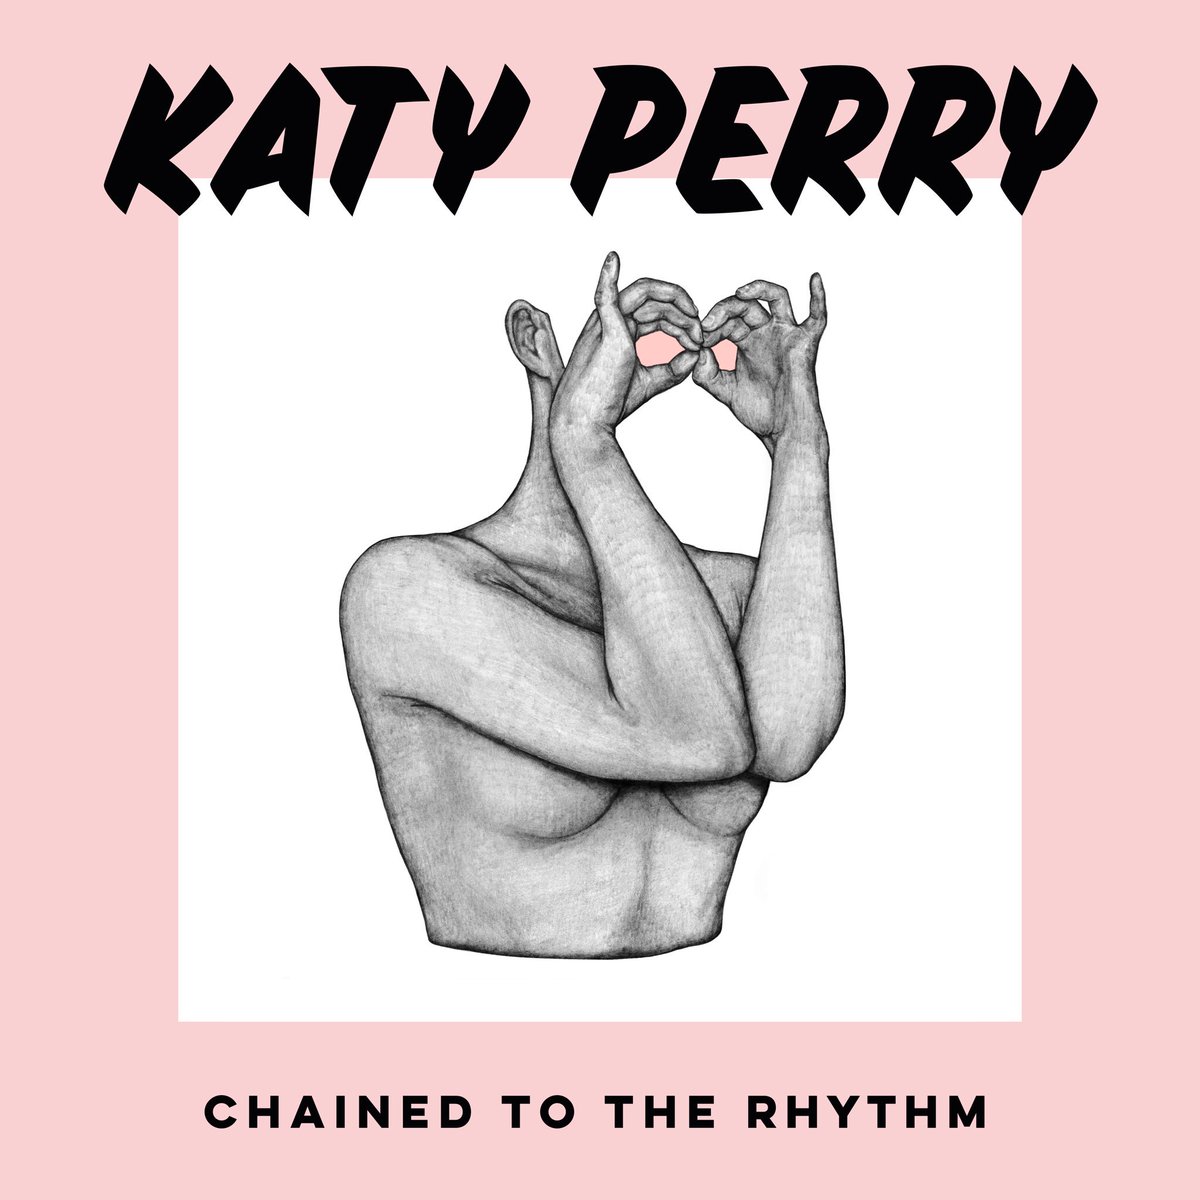 ONE HOUR UNTIL #CHAINEDTOTHERHYTHM. Cover art by #FrederikHeyman https://t.co/pgZDaPBntO